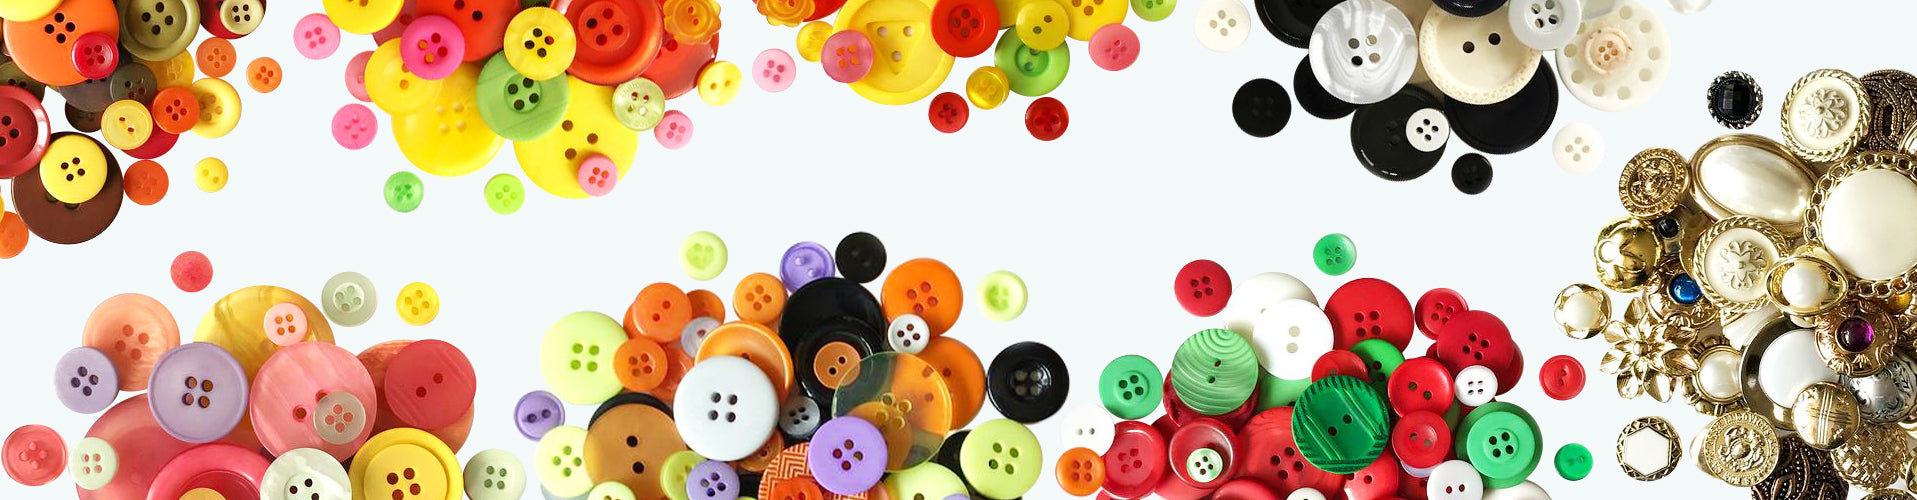 Cookie Jar Craft & Sewing Buttons | Buttons Galore and More